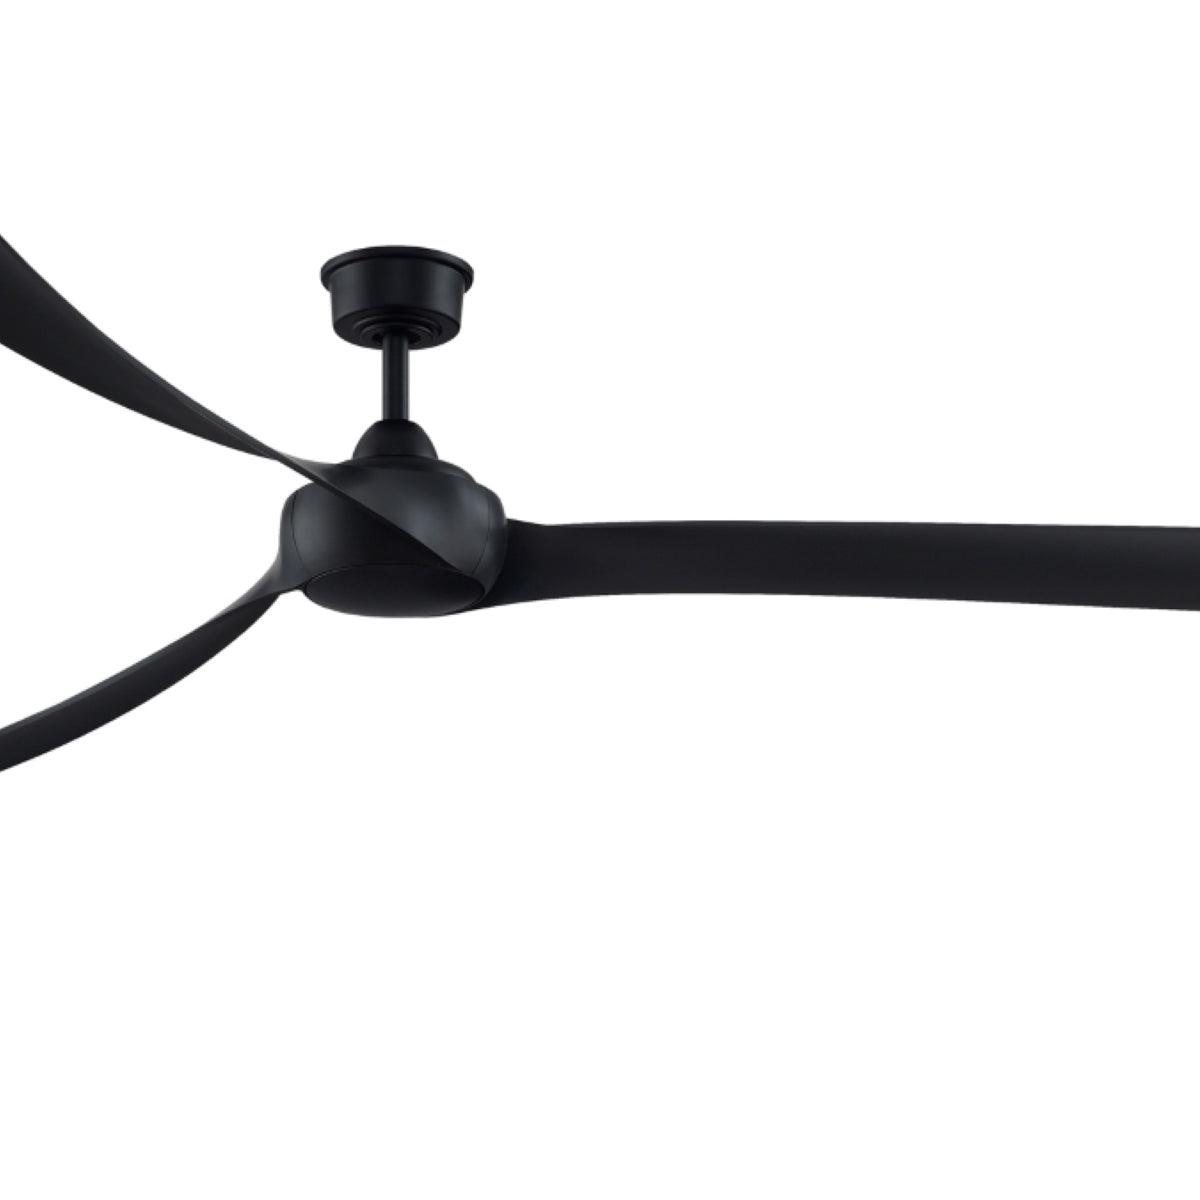 Wrap Custom Indoor/Outdoor Ceiling Fan Motor With Remote, Black Finish, 64-84" Blades Sold Separately - Bees Lighting